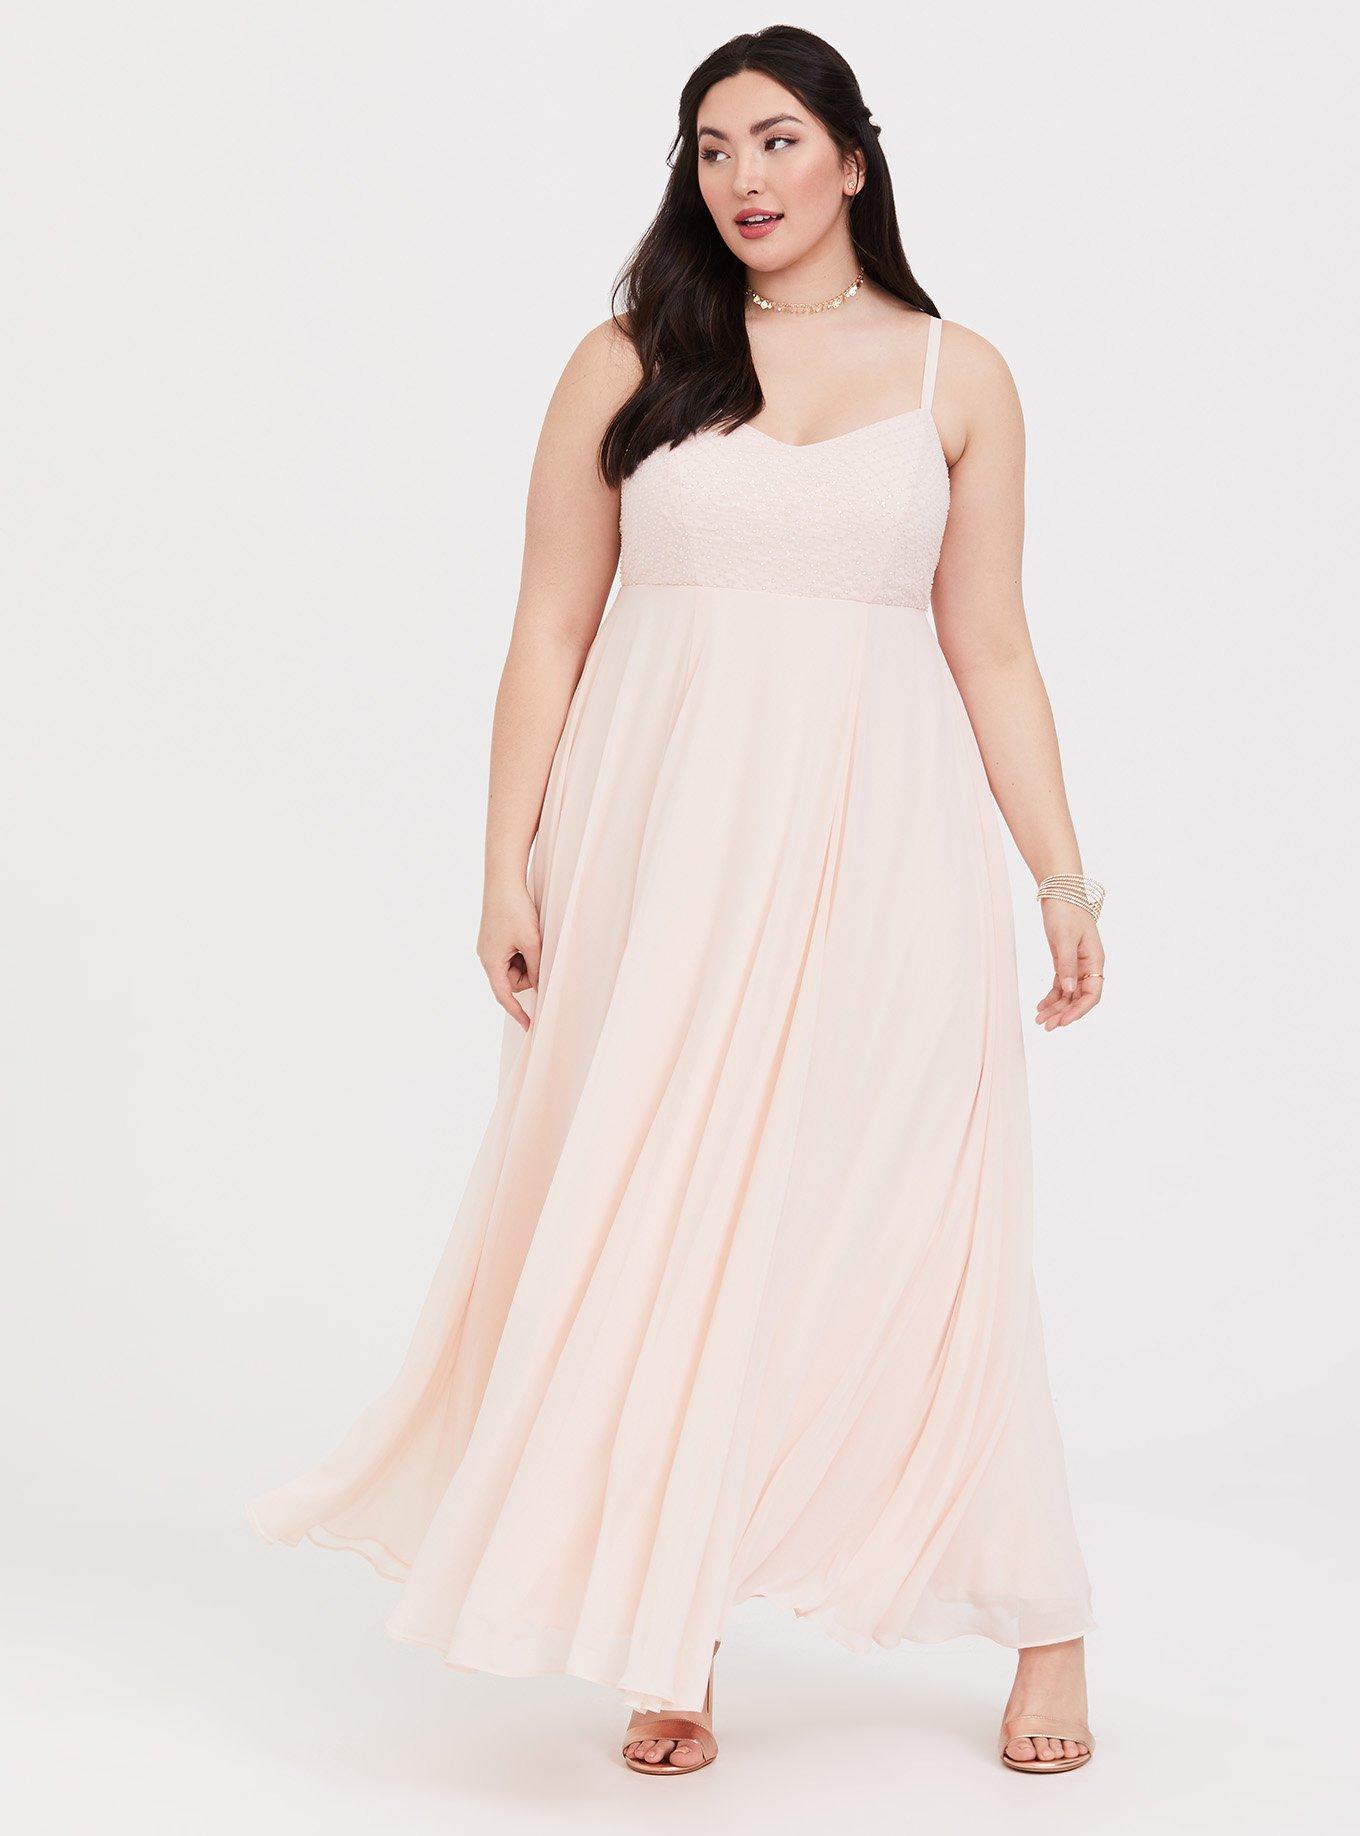 Plus Size - Special Occasion Light Pink Chiffon Beaded Gown - Torrid